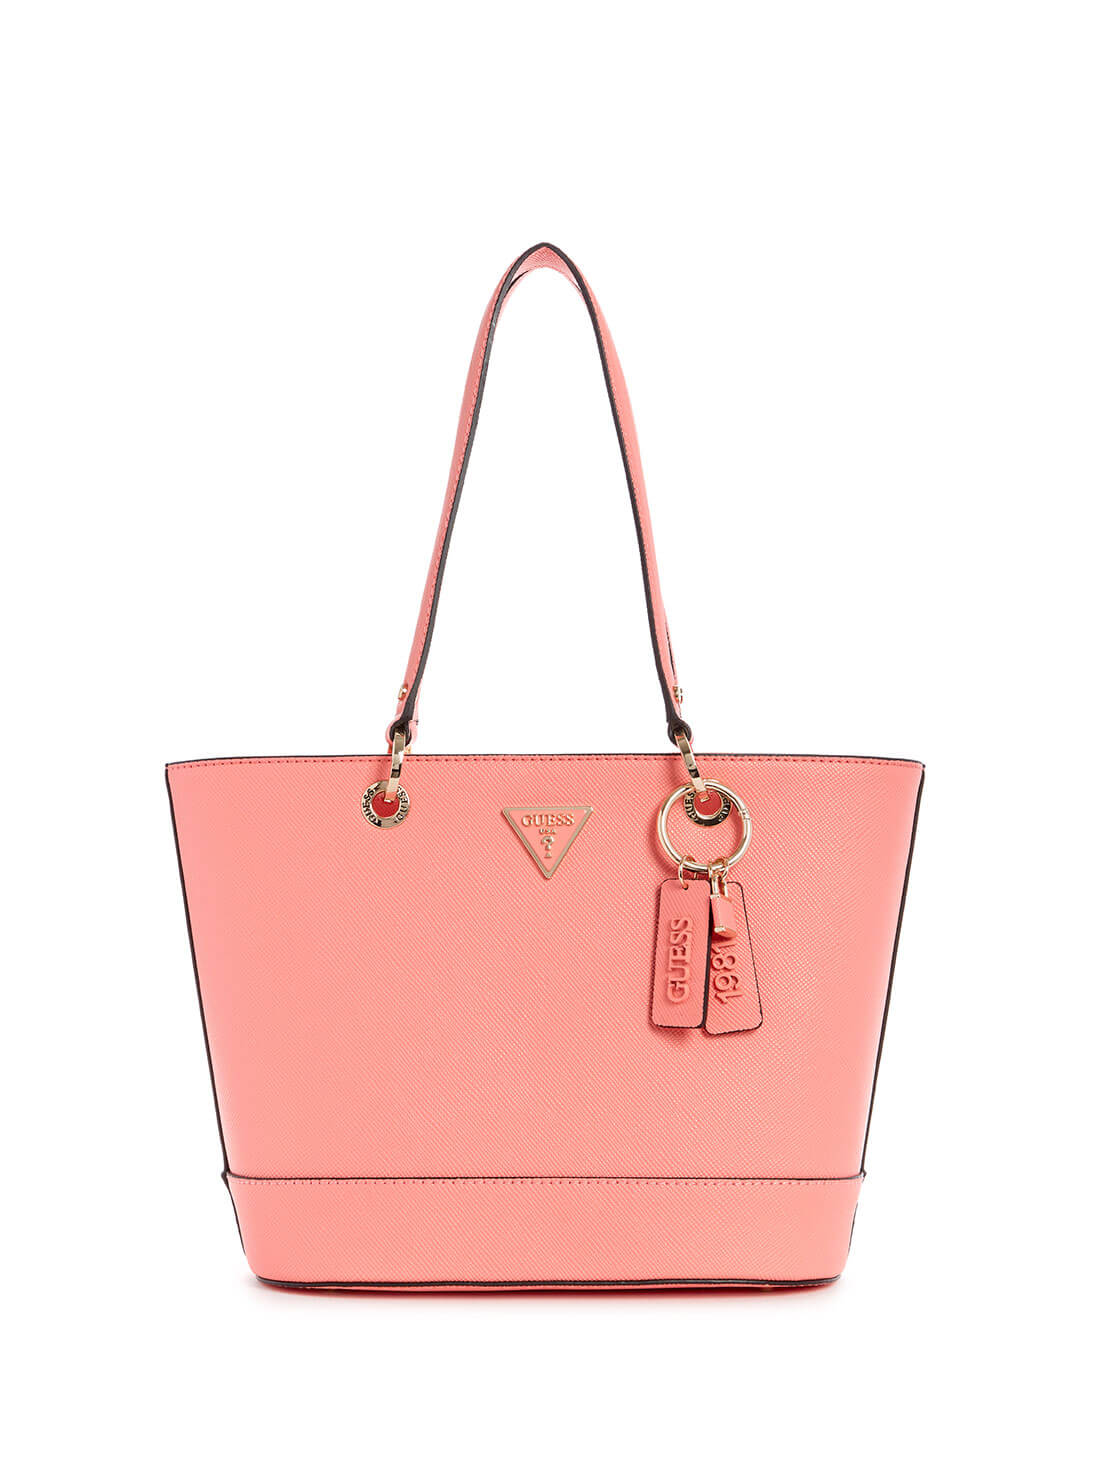 GUESS Womens  Pink Noelle Small Elite Tote Bag ZG787922 Front View